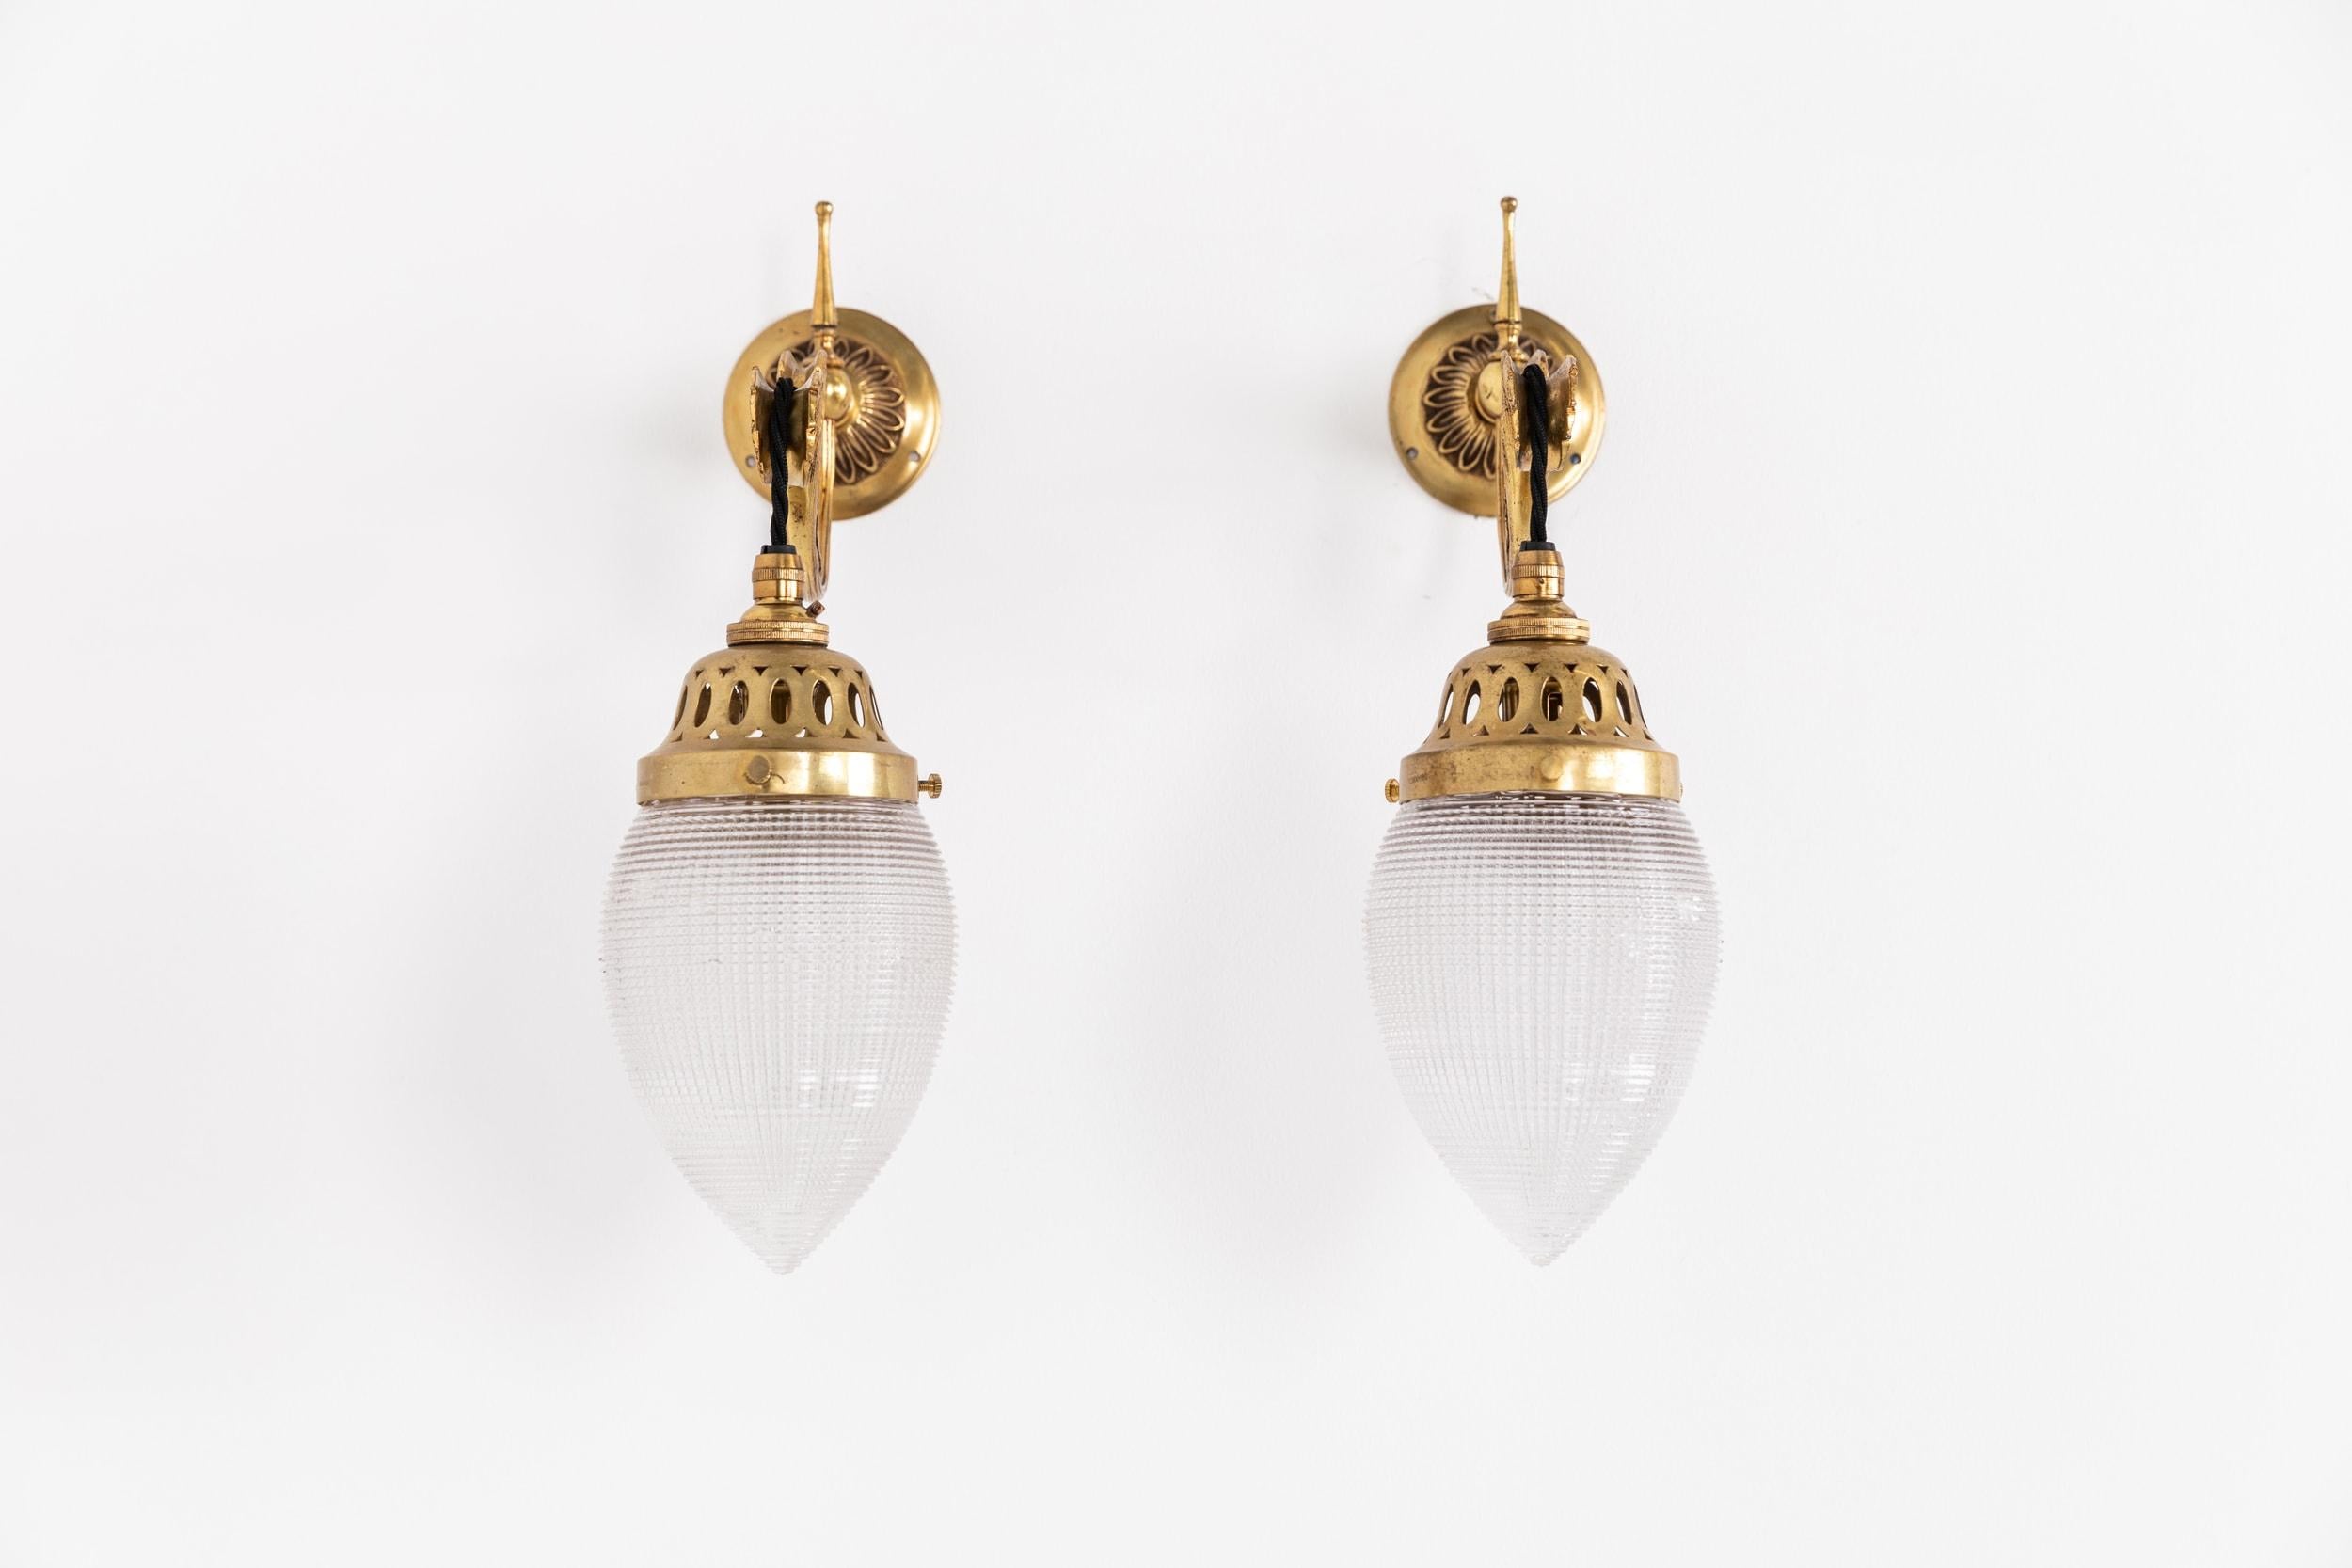 Pair of Antique Brass Osler / Holophane Wall Lamp Sconce Lights, c.1920 For Sale 3